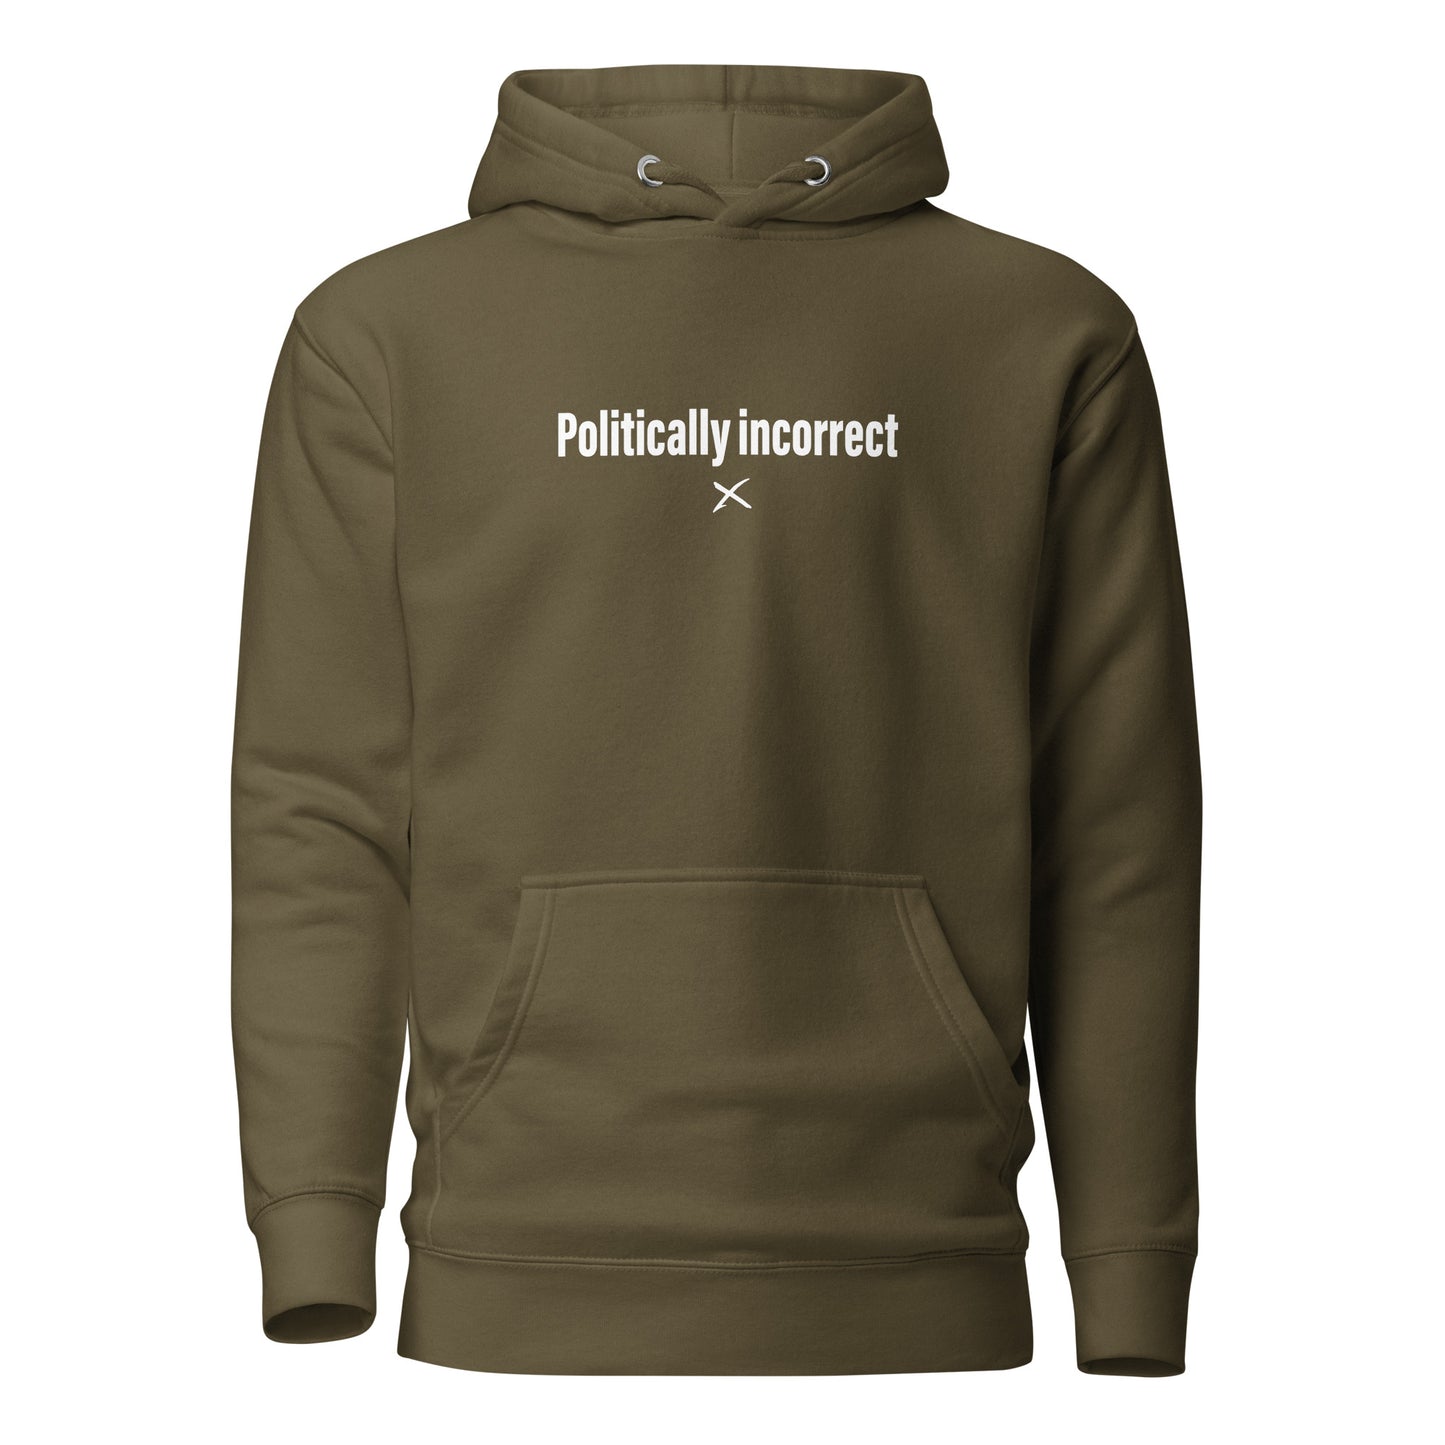 Politically incorrect - Hoodie